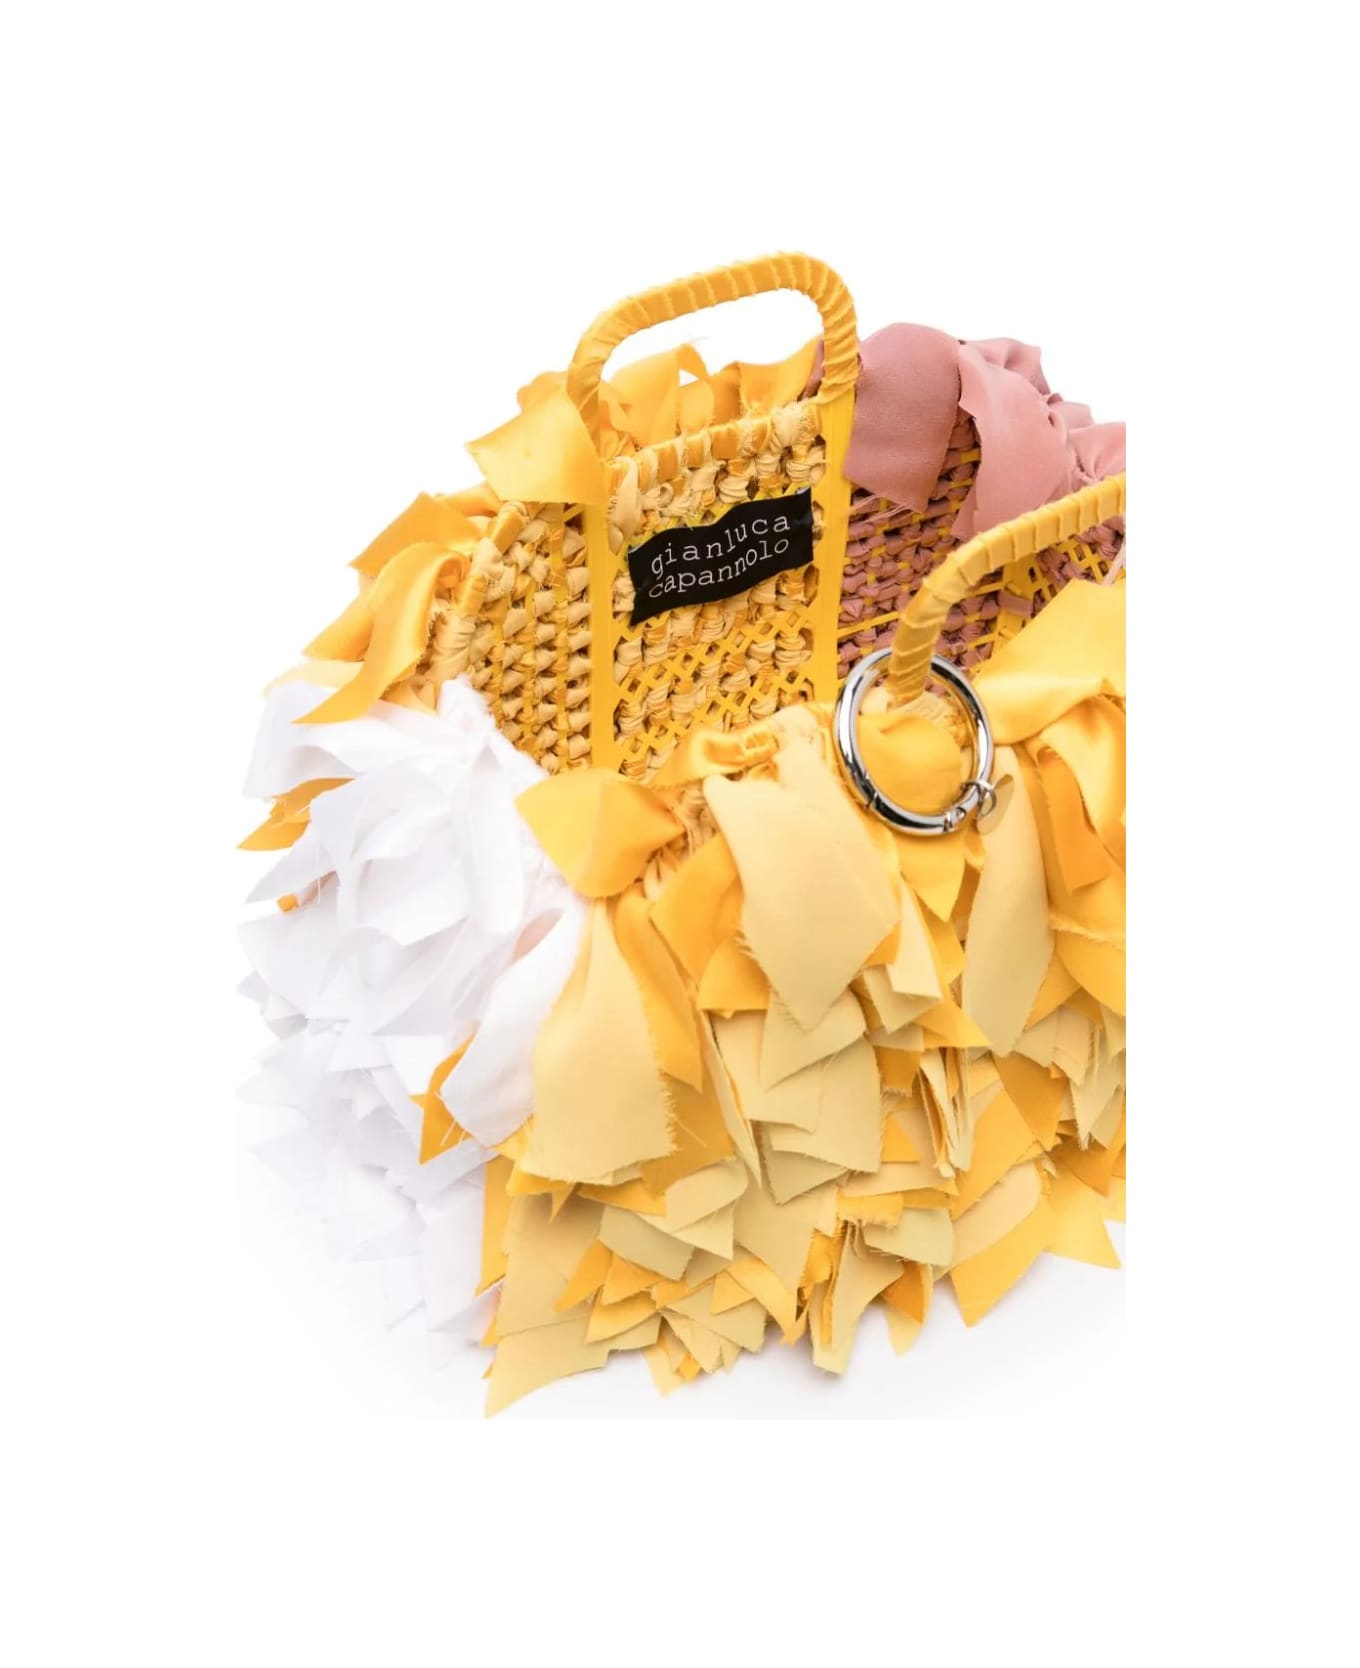 Gianluca Capannolo Tote Bag With Colour Block Design - Yellow バッグ